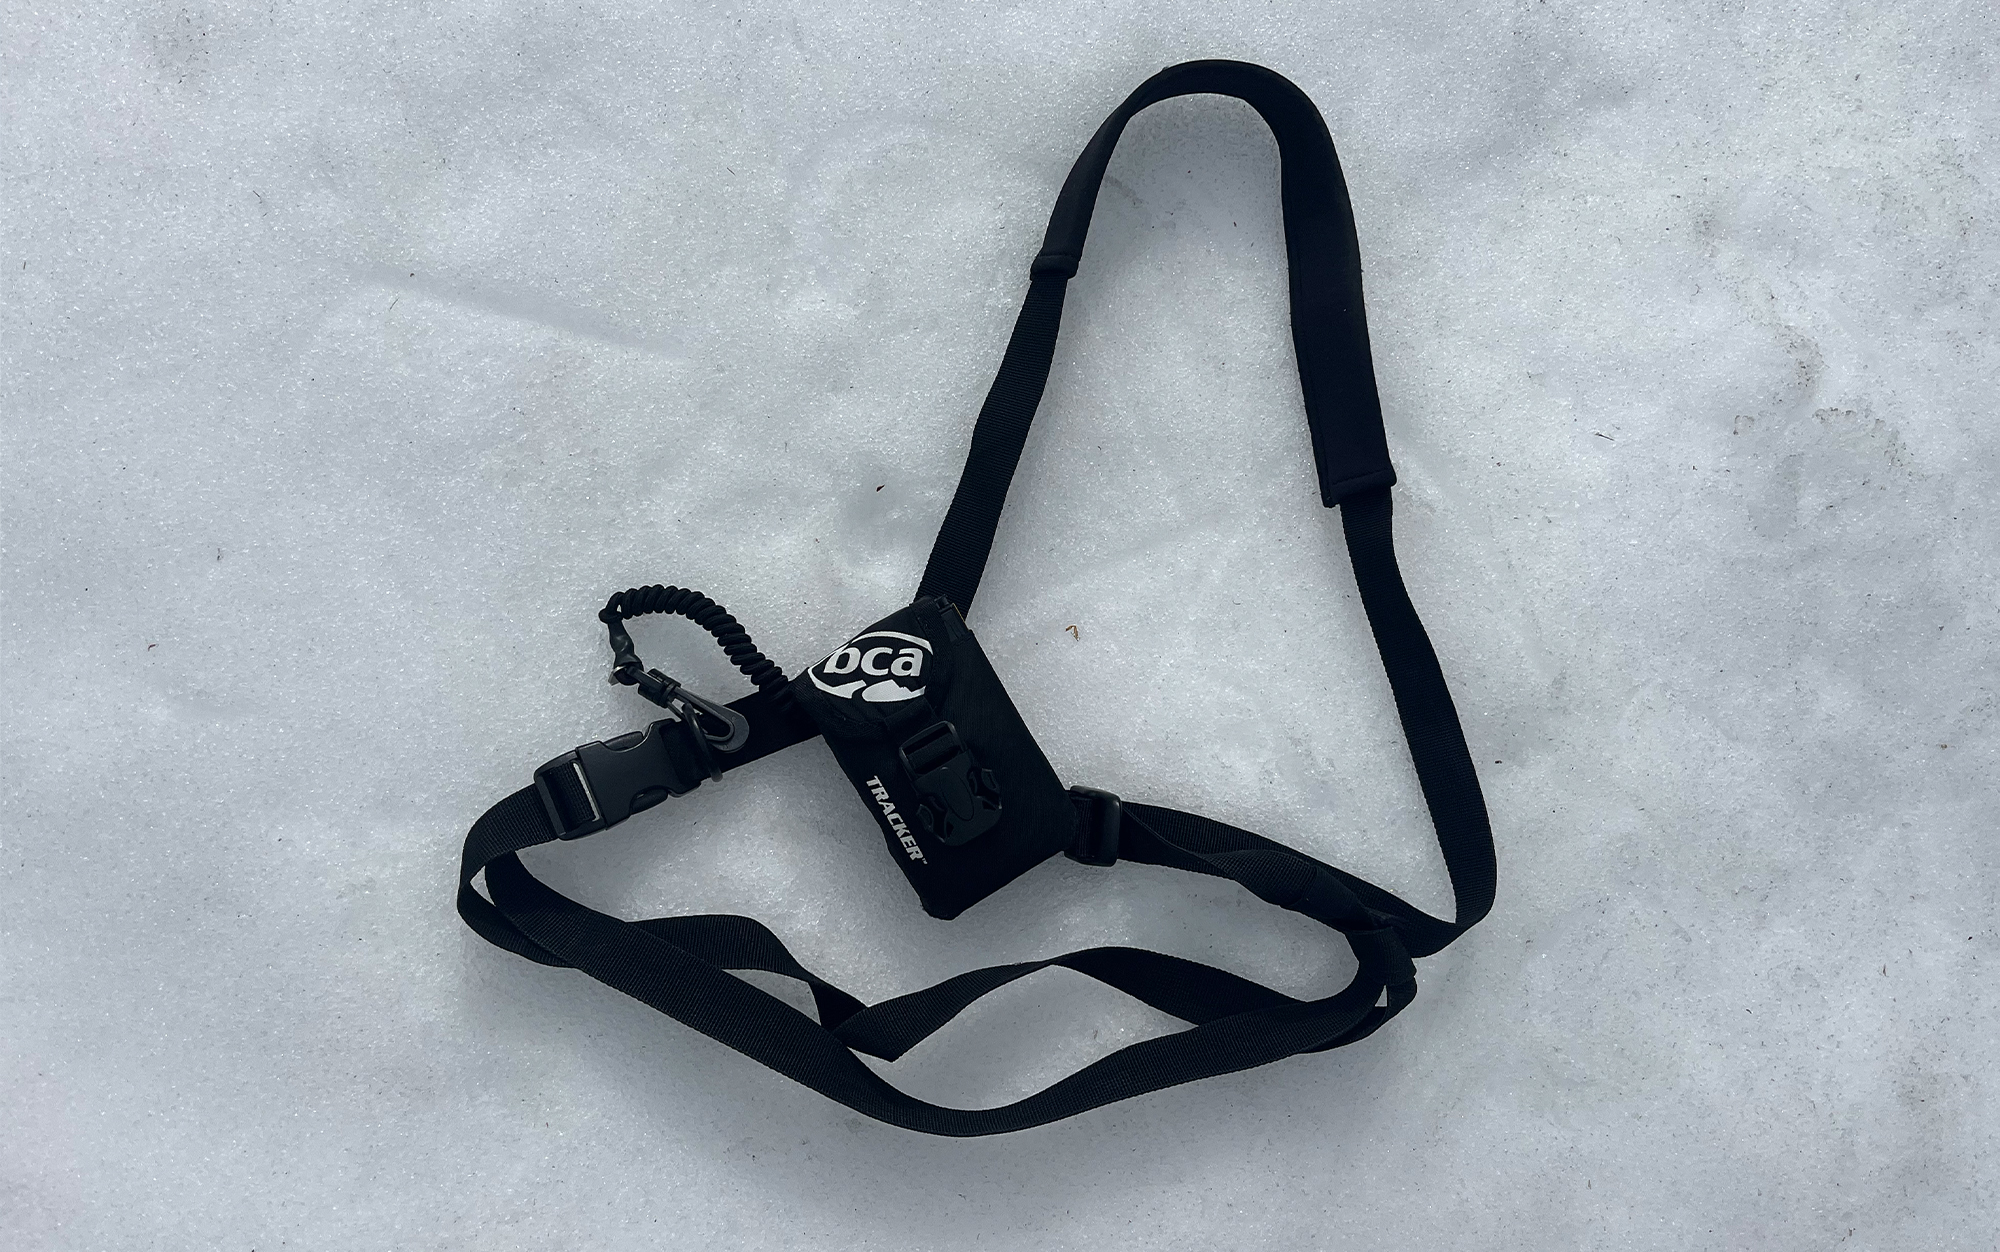 The BCA Tracker 3 harness sits in the snow.